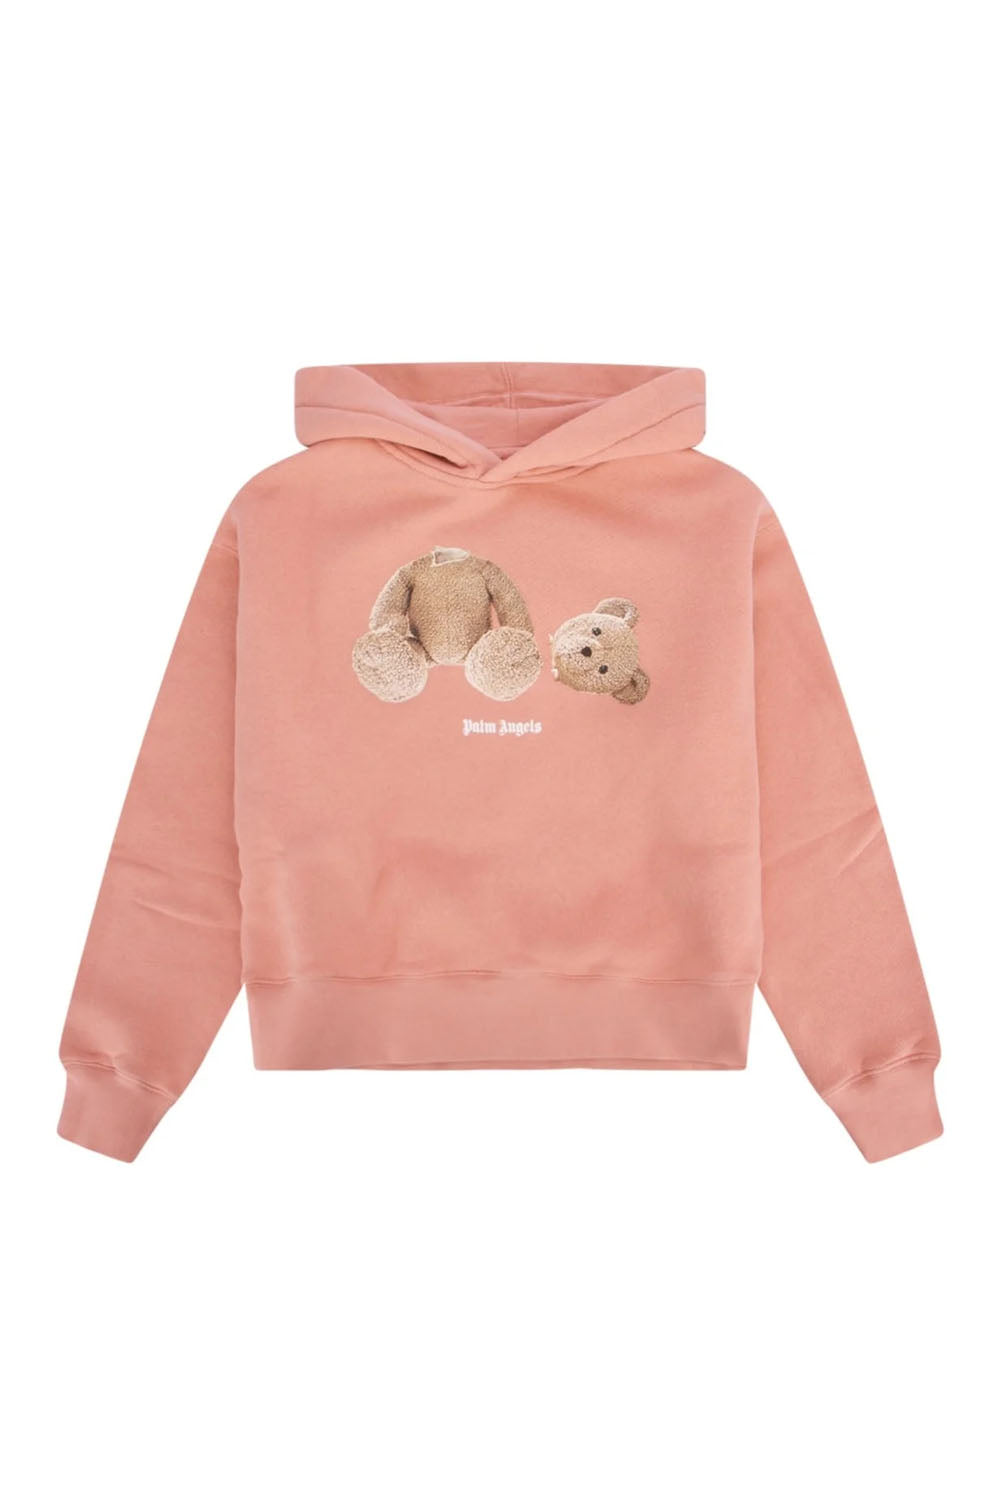 ​Palm Angels Bear Hoodie for Girls - Maison7